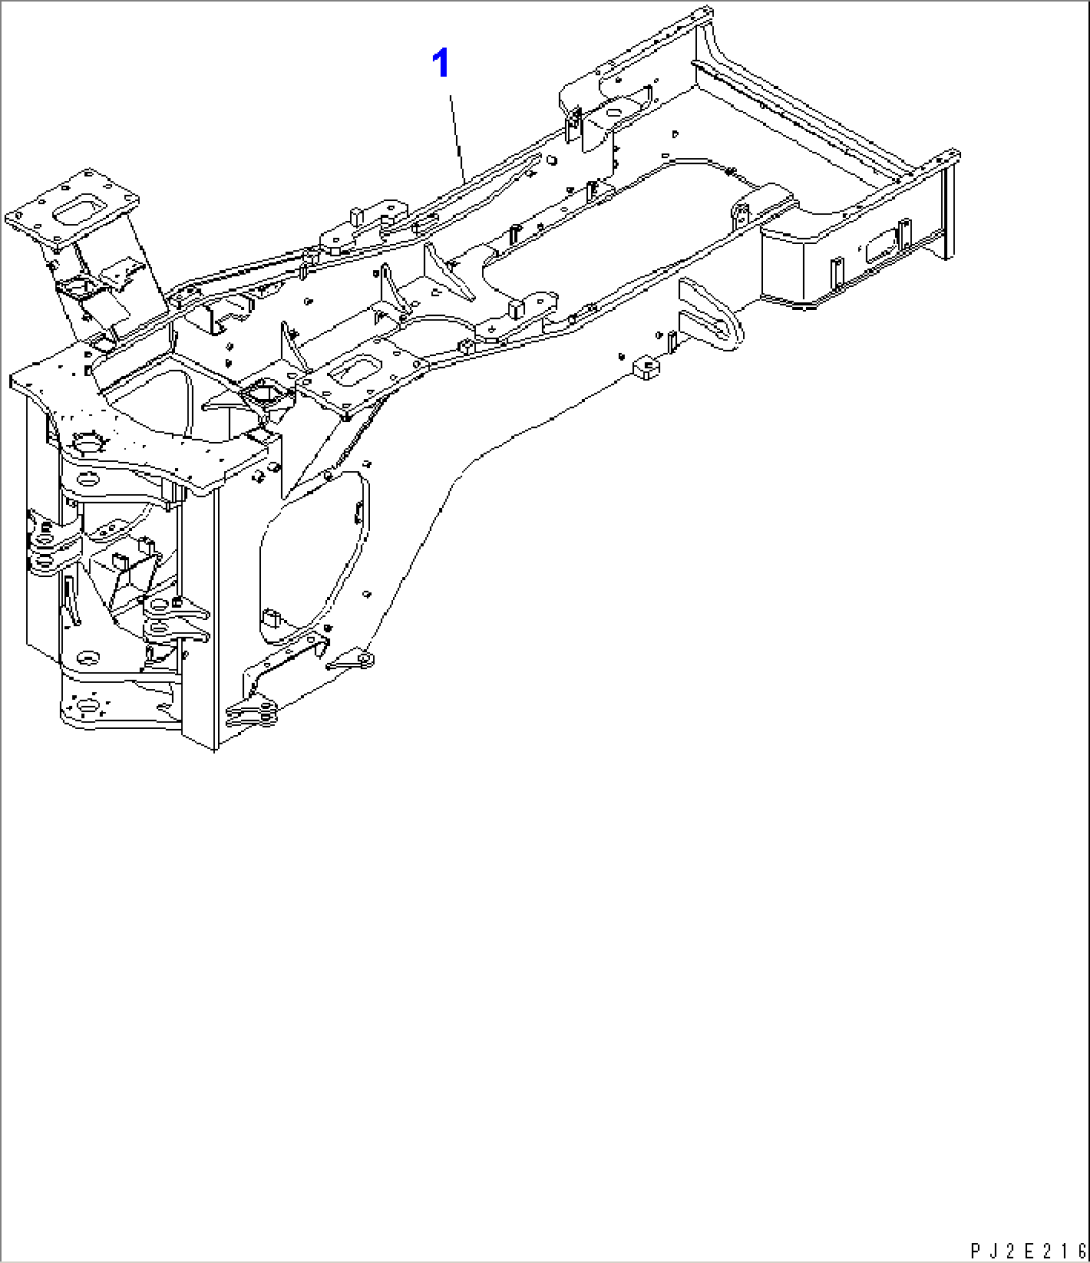 REAR FRAME (WITH HIGH LIFT AND AUTO GREASE)(#53001-)